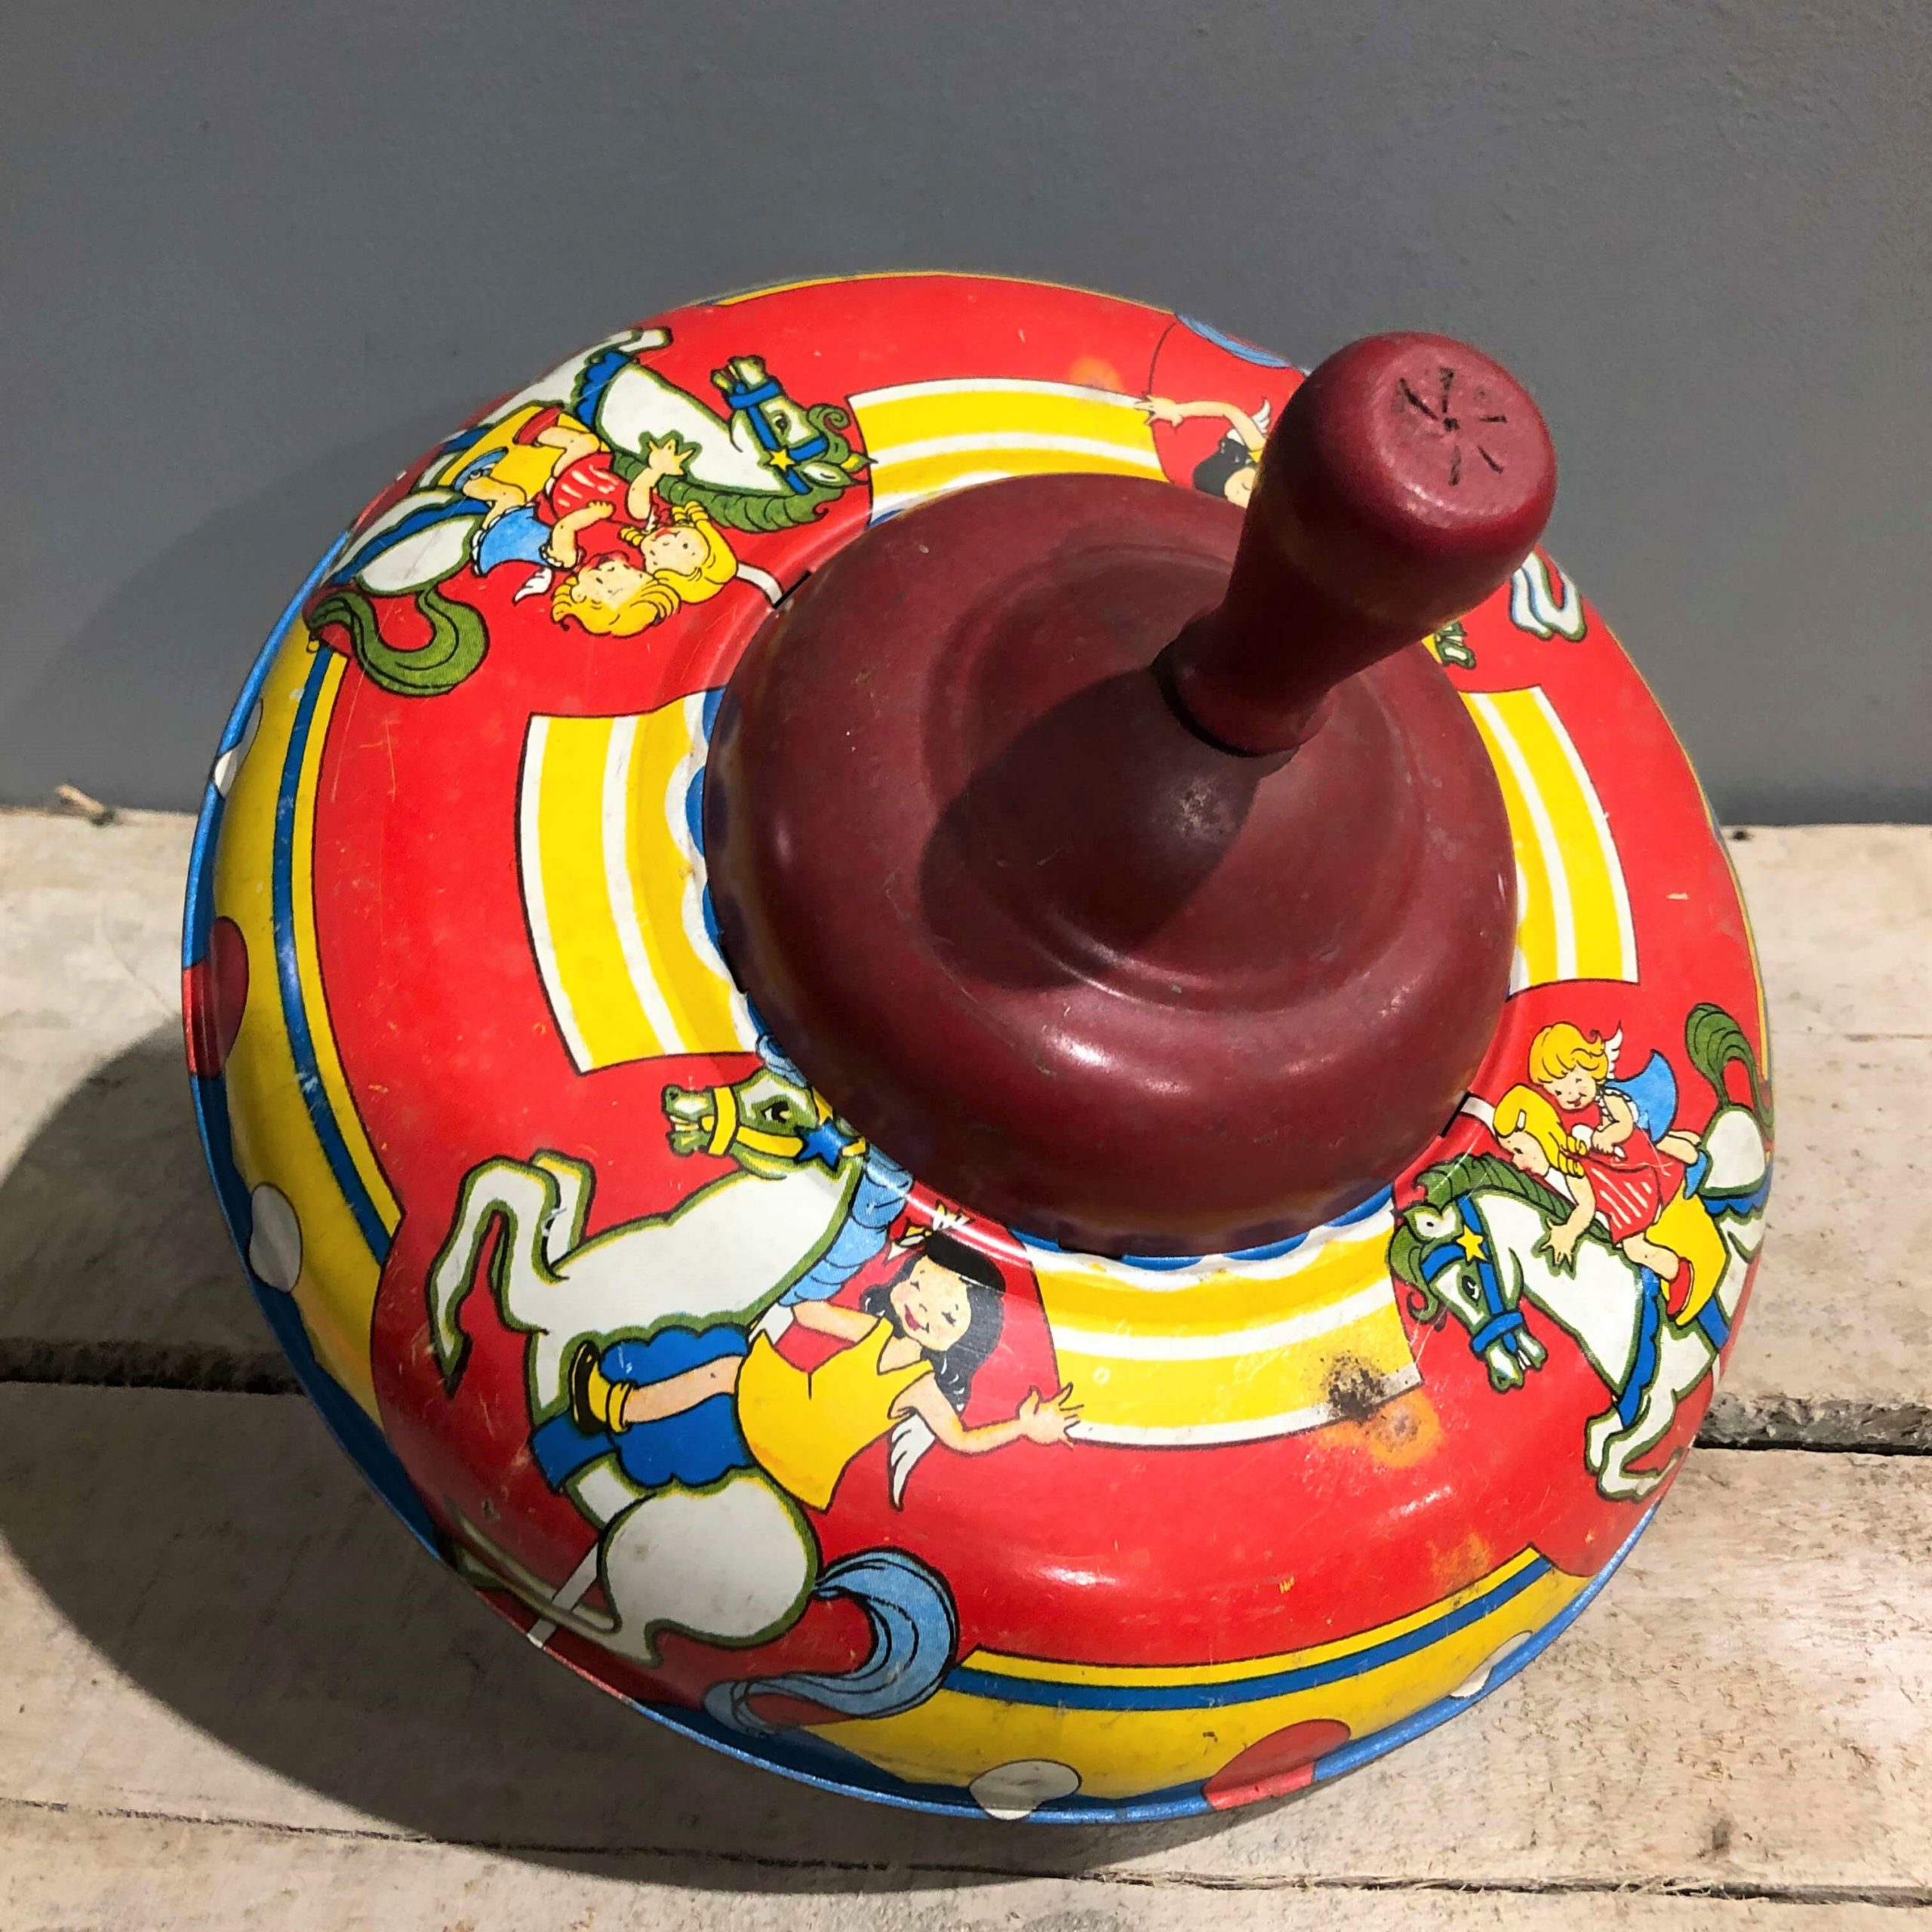 Old Fashioned Spinning Top Toy | canoeracing.org.uk